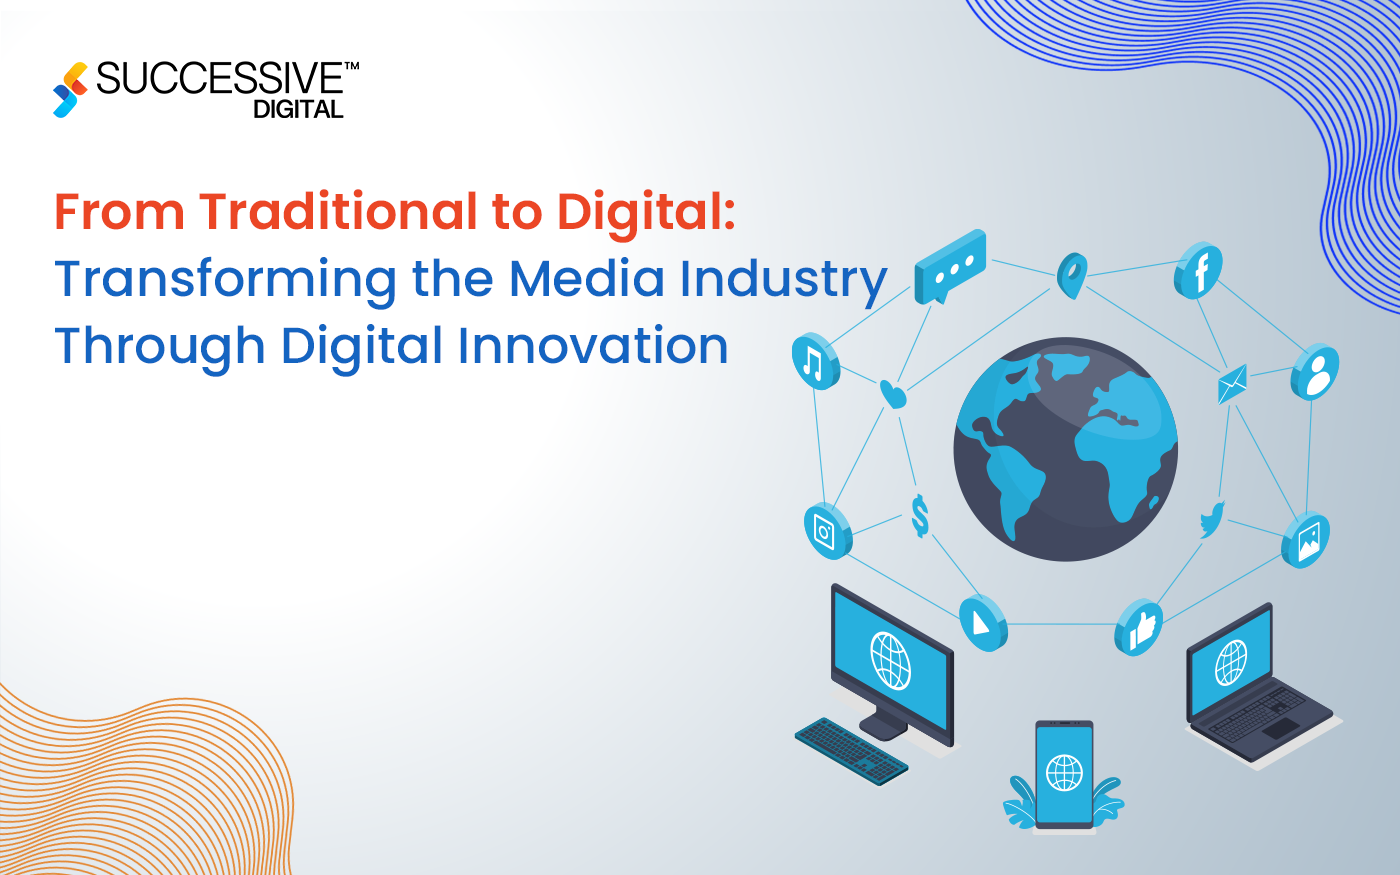 From Traditional to Digital: Transforming the Media Industry Through Digital Innovation